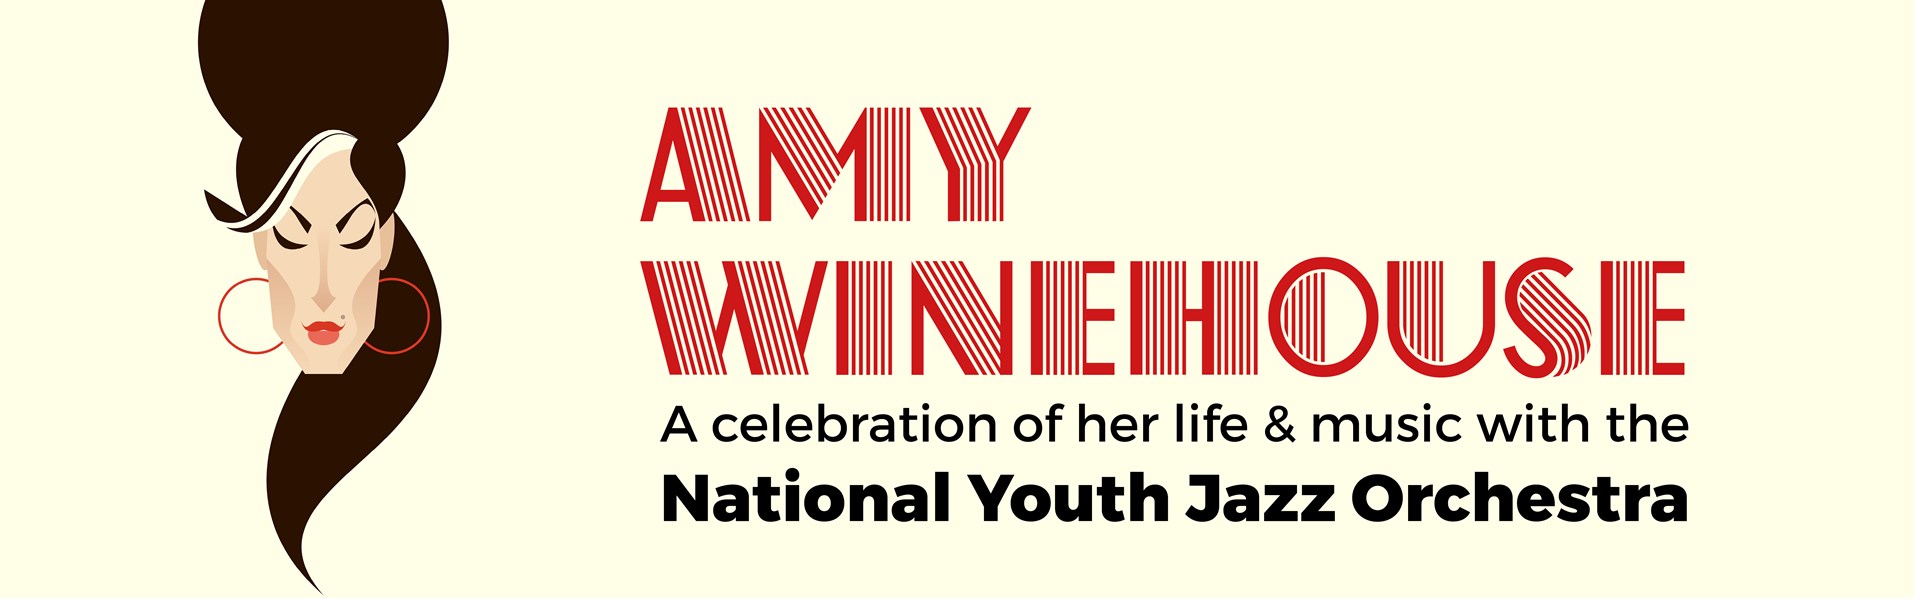 Amy Winehouse: A Celebration of her Life & Music by the National Youth Jazz Orchestra